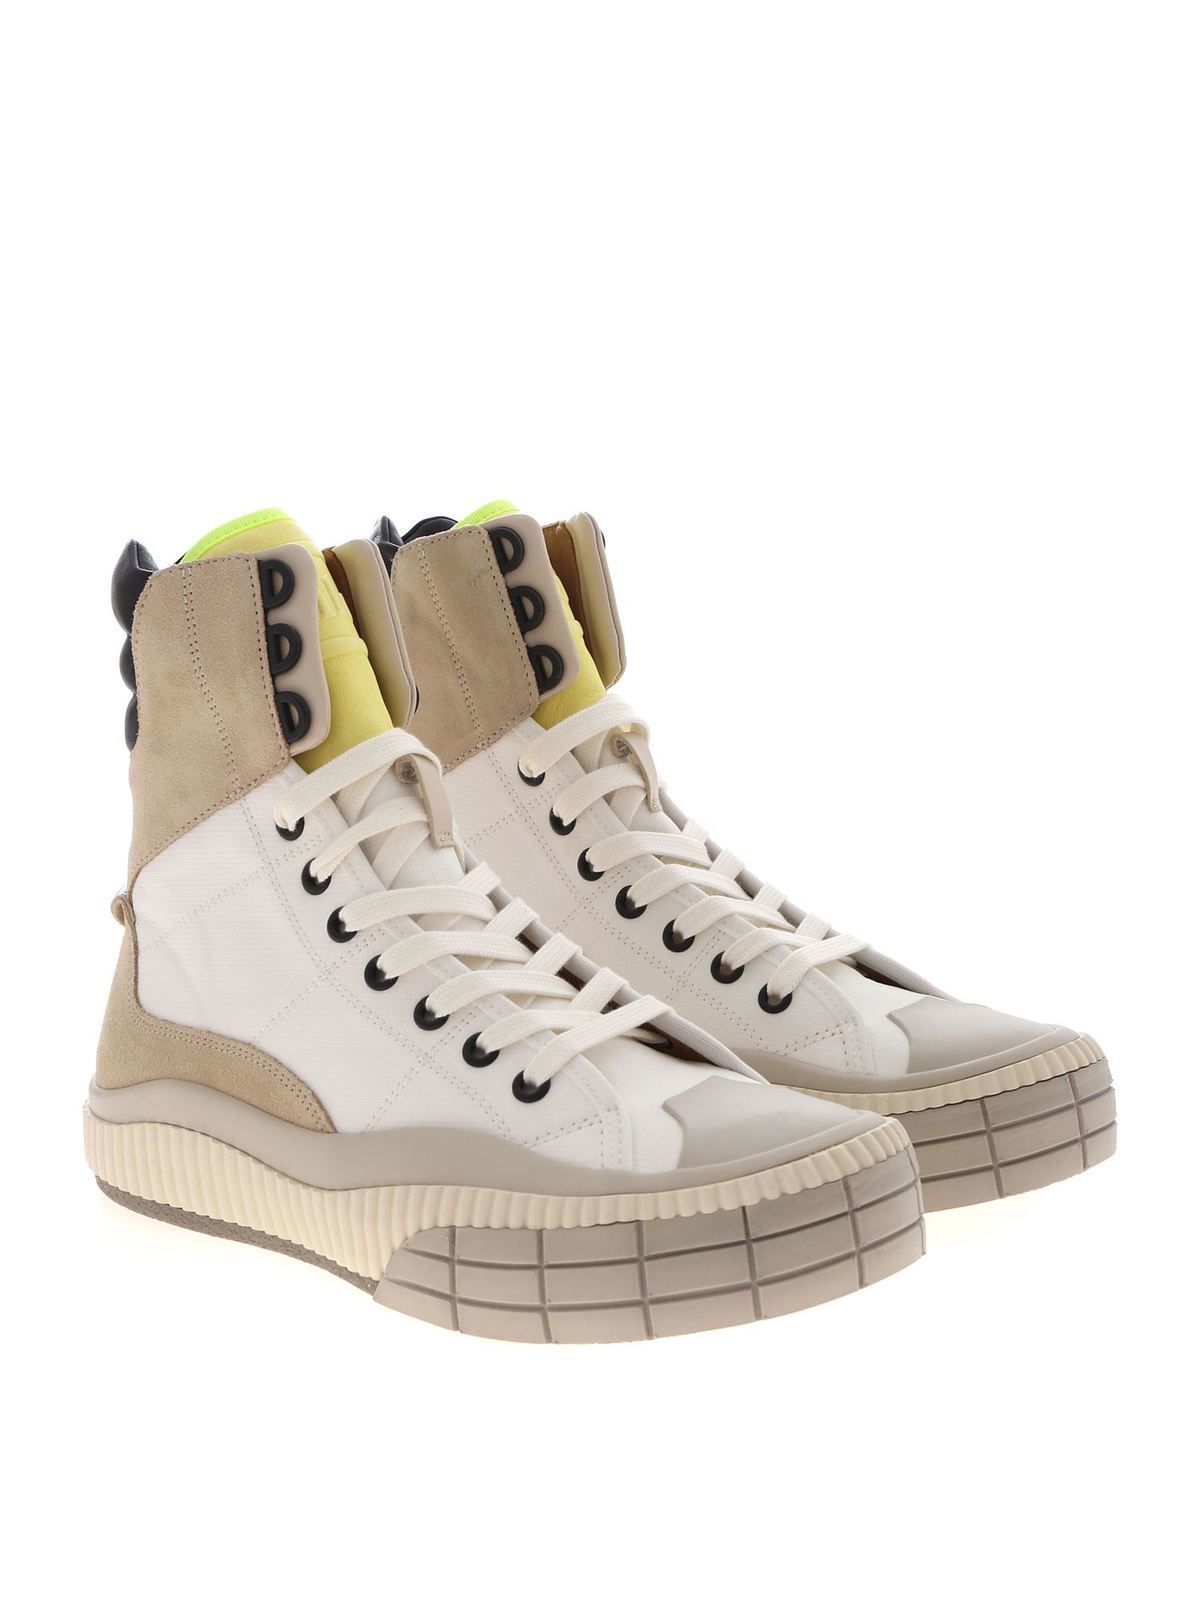 Trainers Chloe' - Clint sneakers in white and dove grey color ...